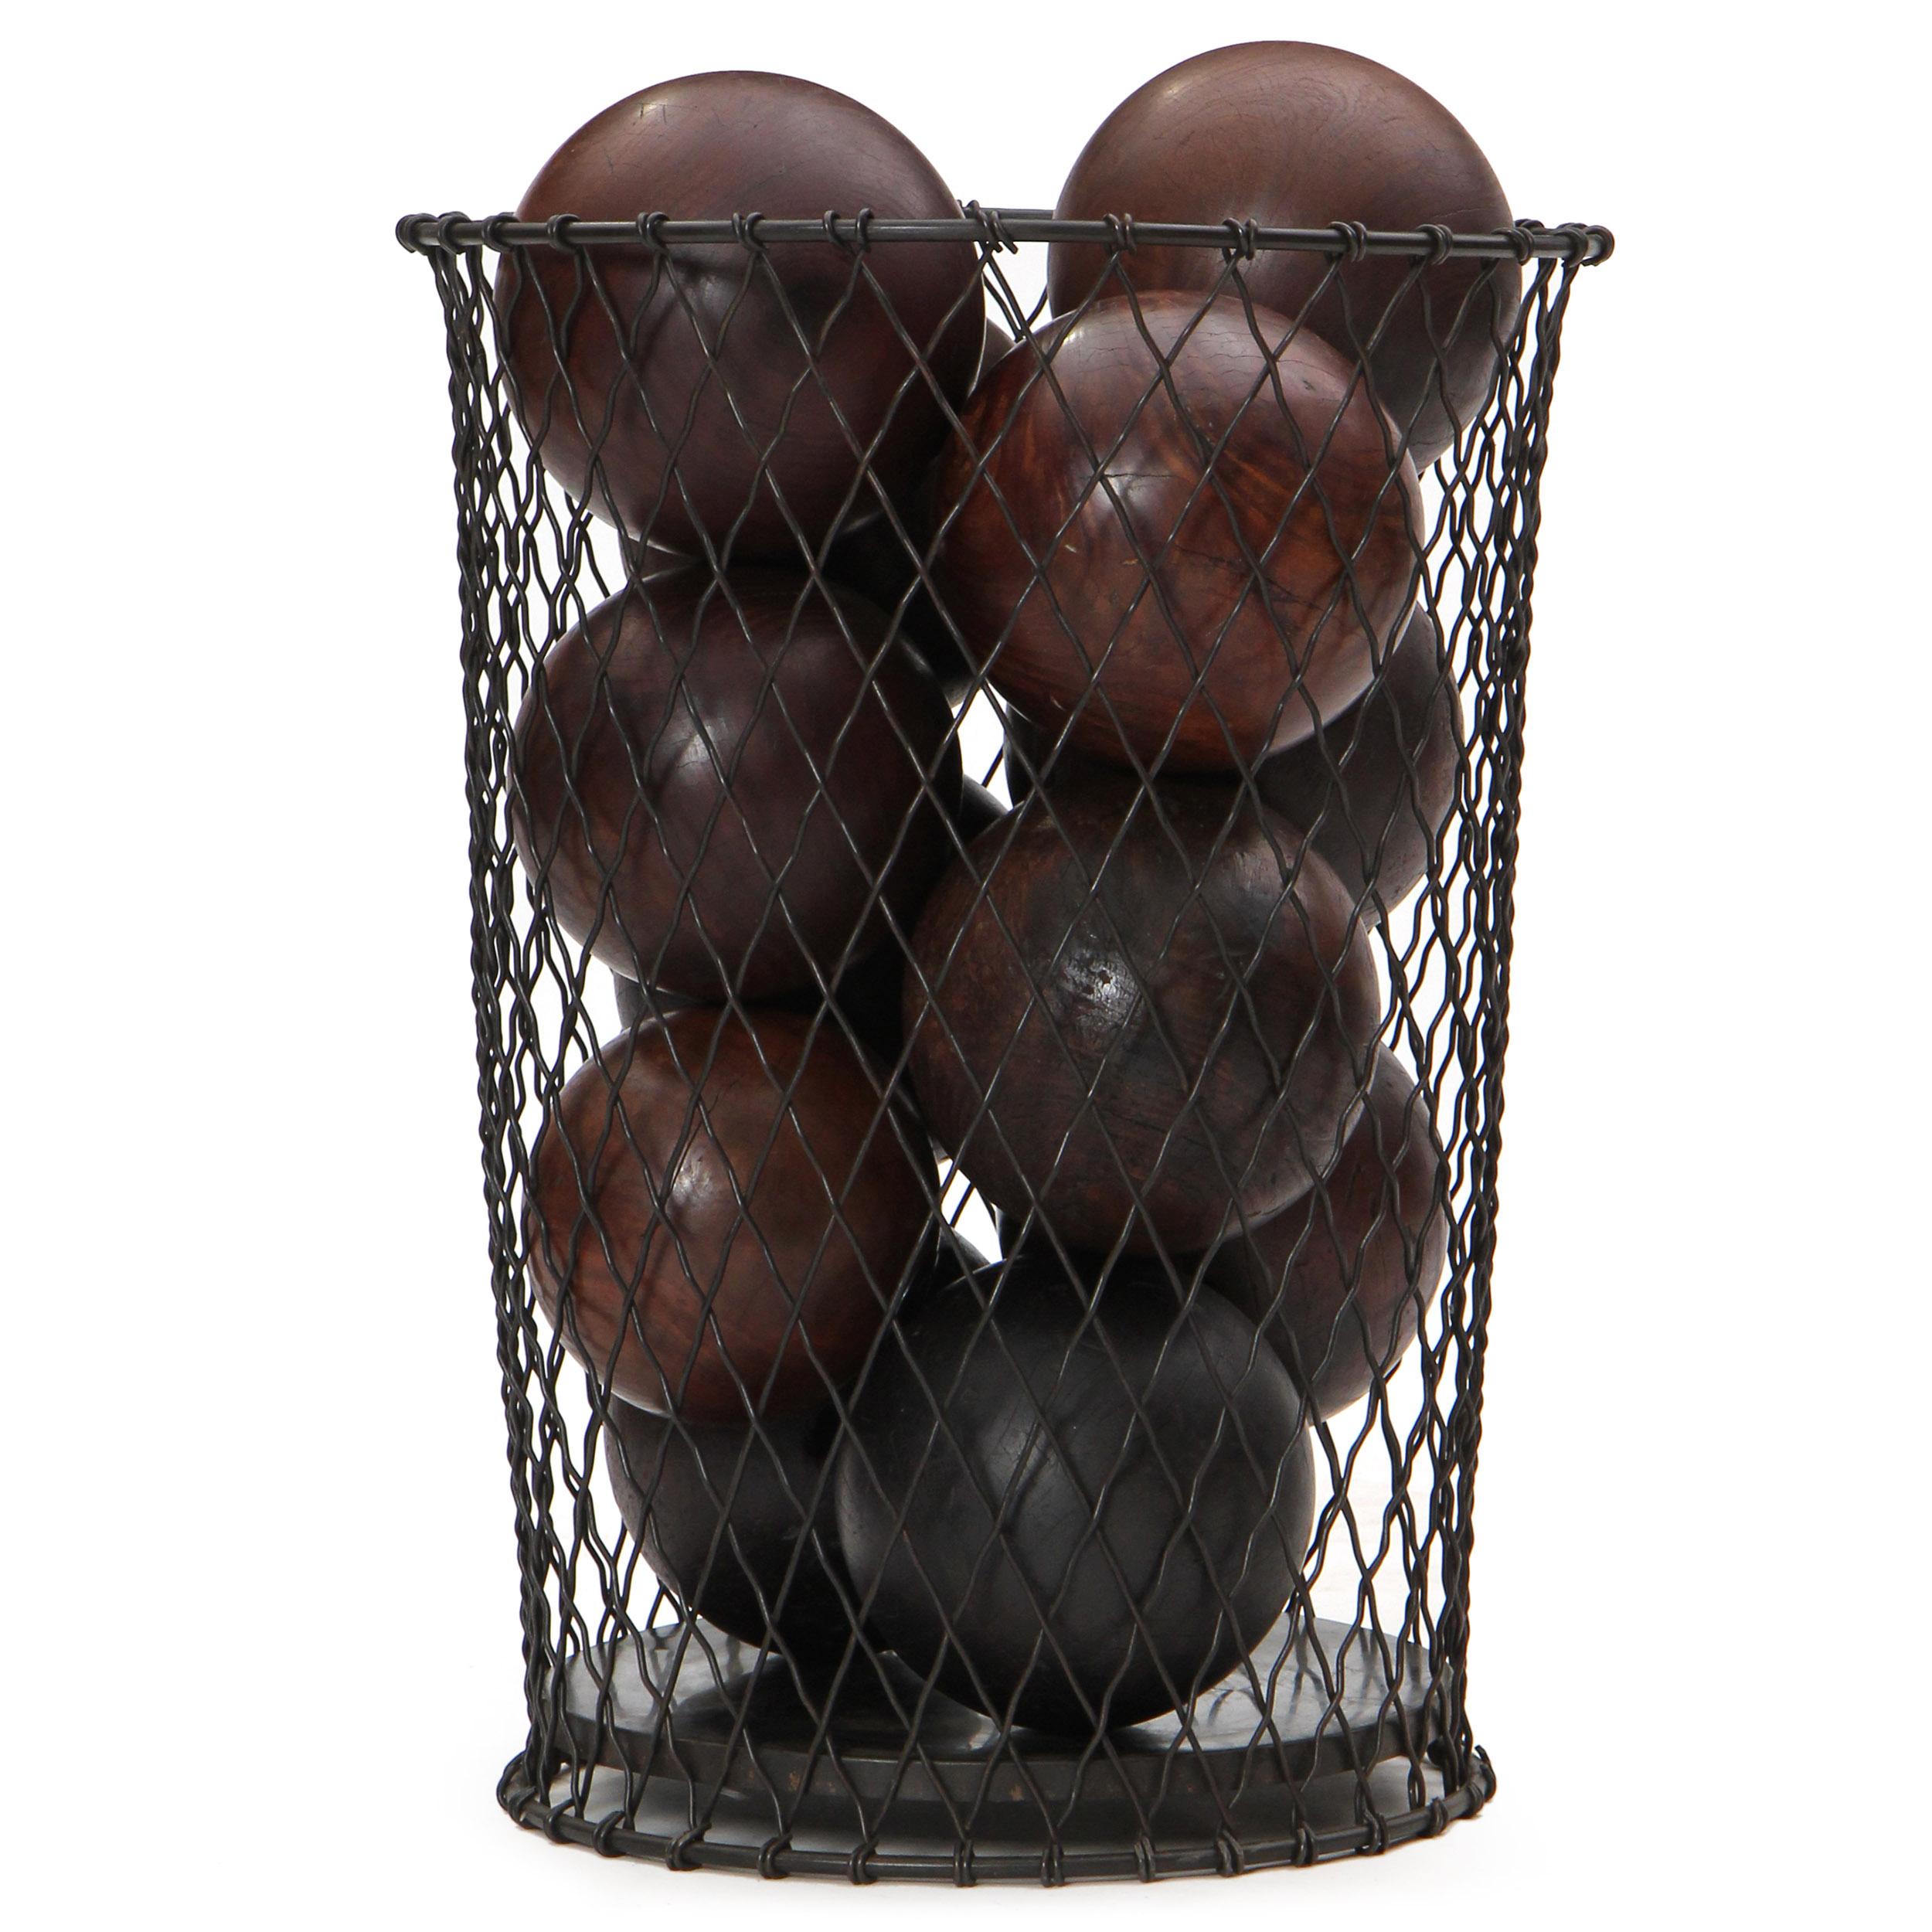 A vintage black patina waste basket well-formed of solid steel wire and woven in a diamond pattern. Filled with 12 lignum vitae bowling balls. Manufactured in the 1920s.